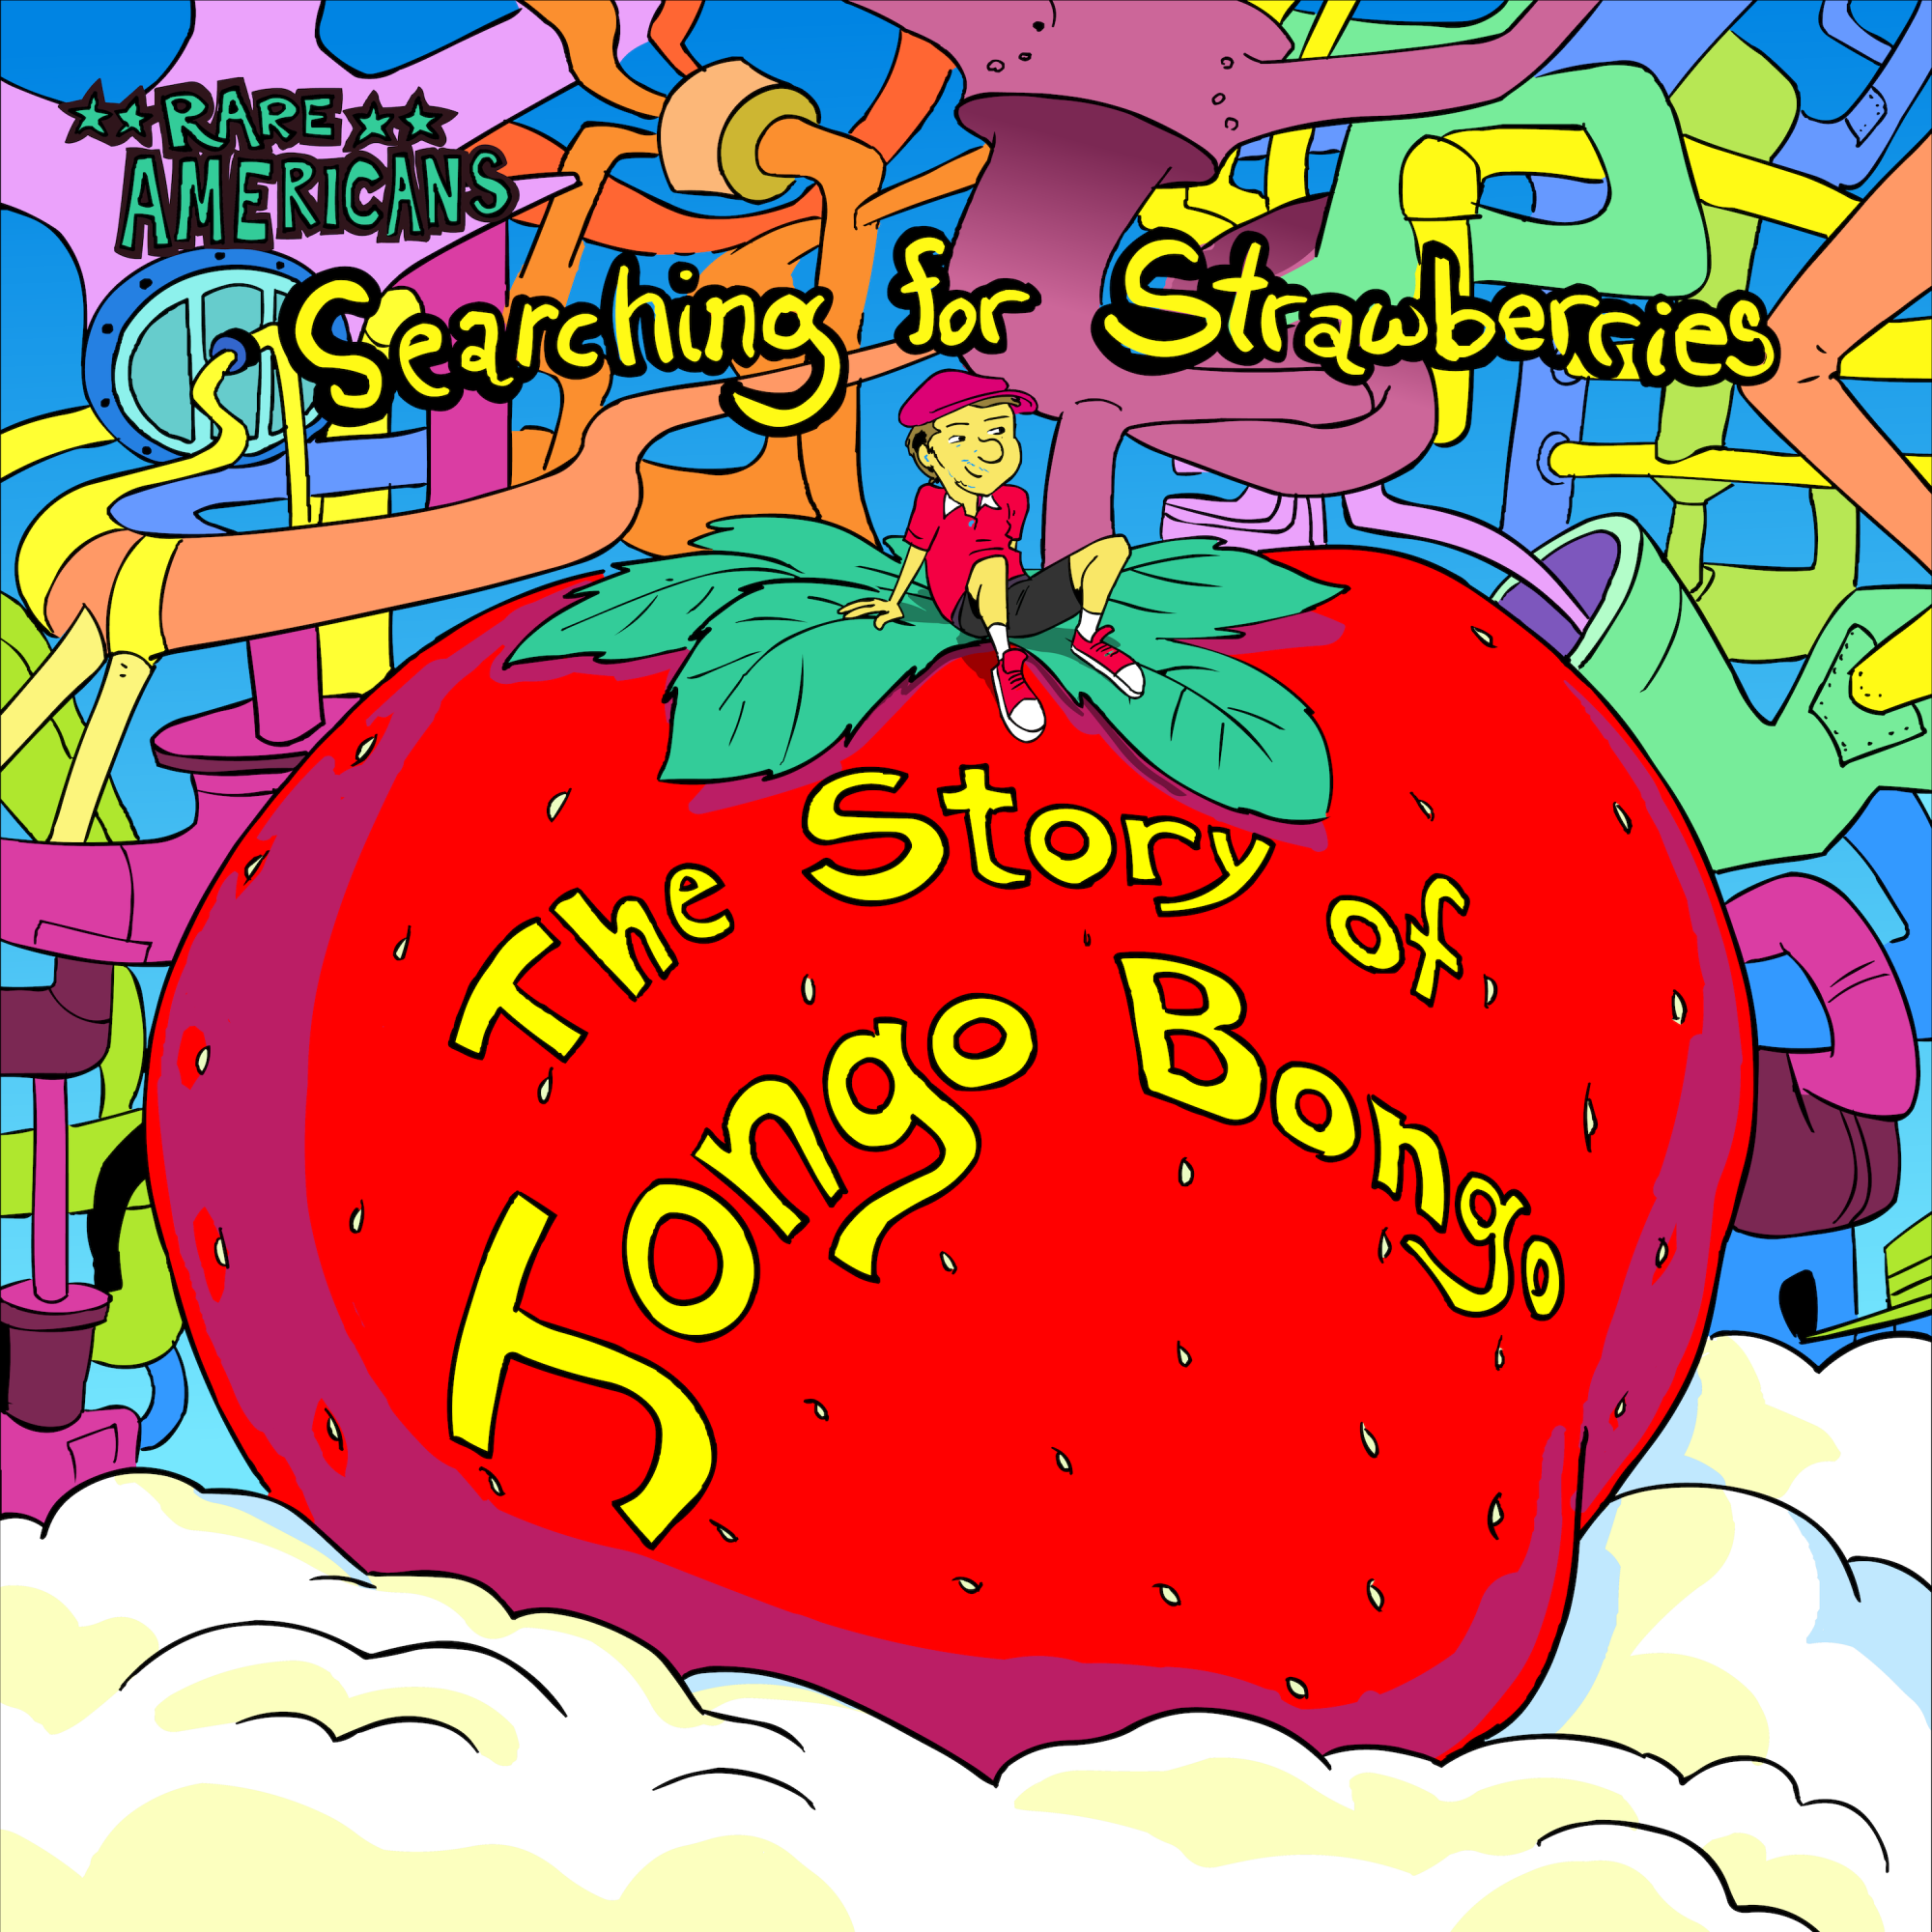 ALBUM & VIDEO REVIEW: Searching for Strawberries: The Story of Jongo Bongo, Act 3